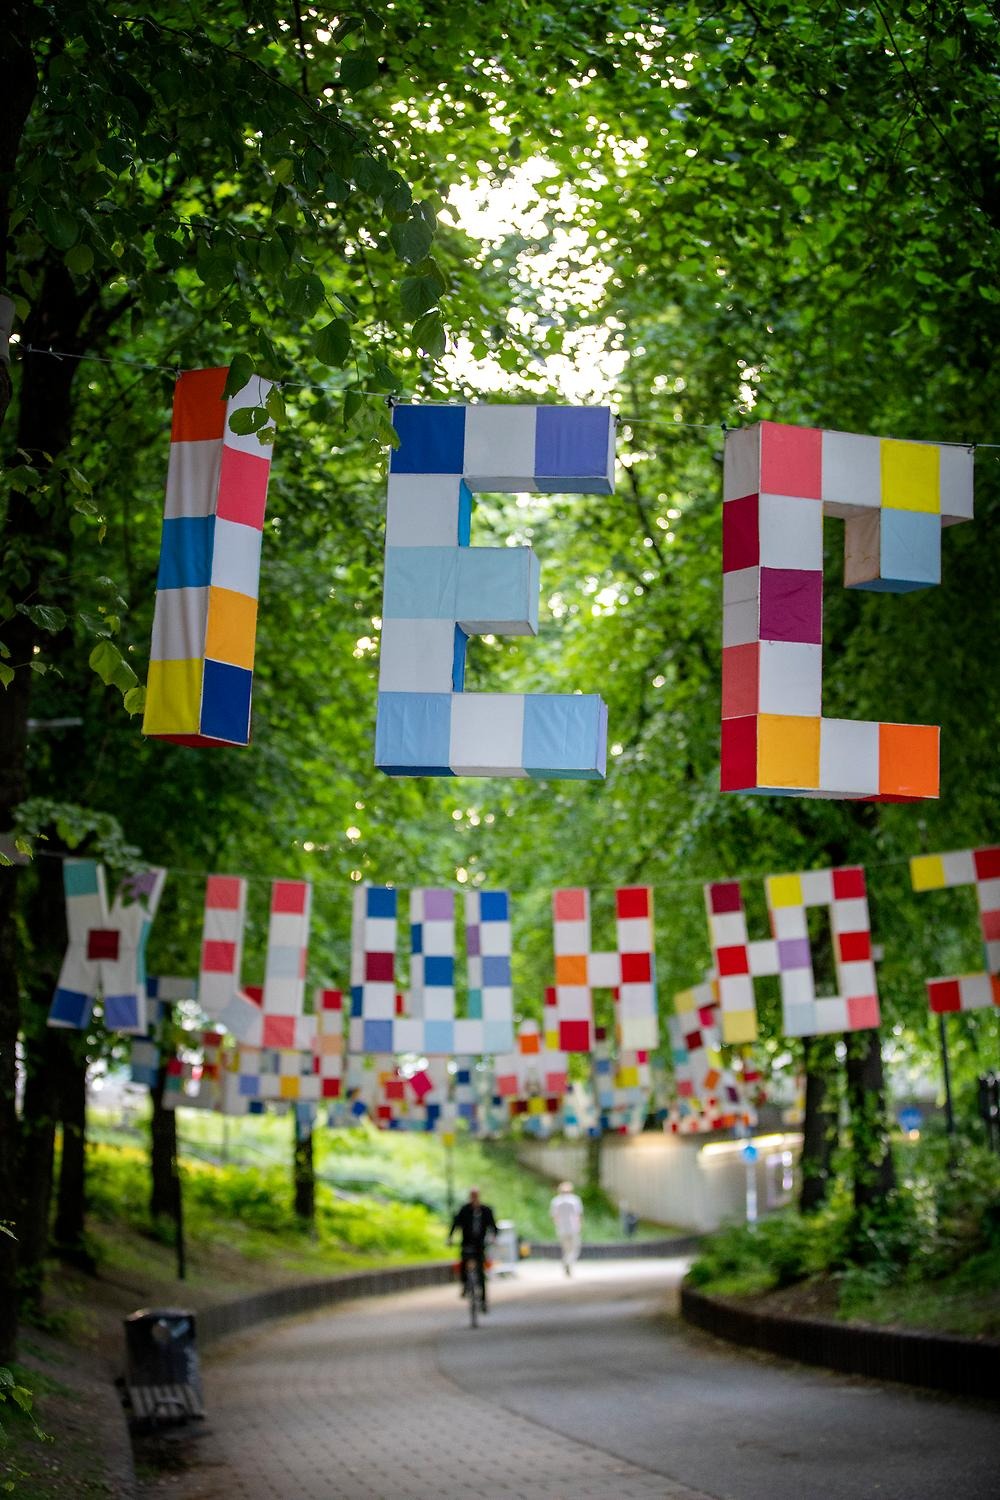 Above a bicycle lane in the trees hang large letters from the Latin, Hebrew and Cyrillic alphabets. The letters are three-dimensional, white and with sewn-on rectangular textile pieces in blue, red and orange tones. In the background is a blurred man on a bicycle.